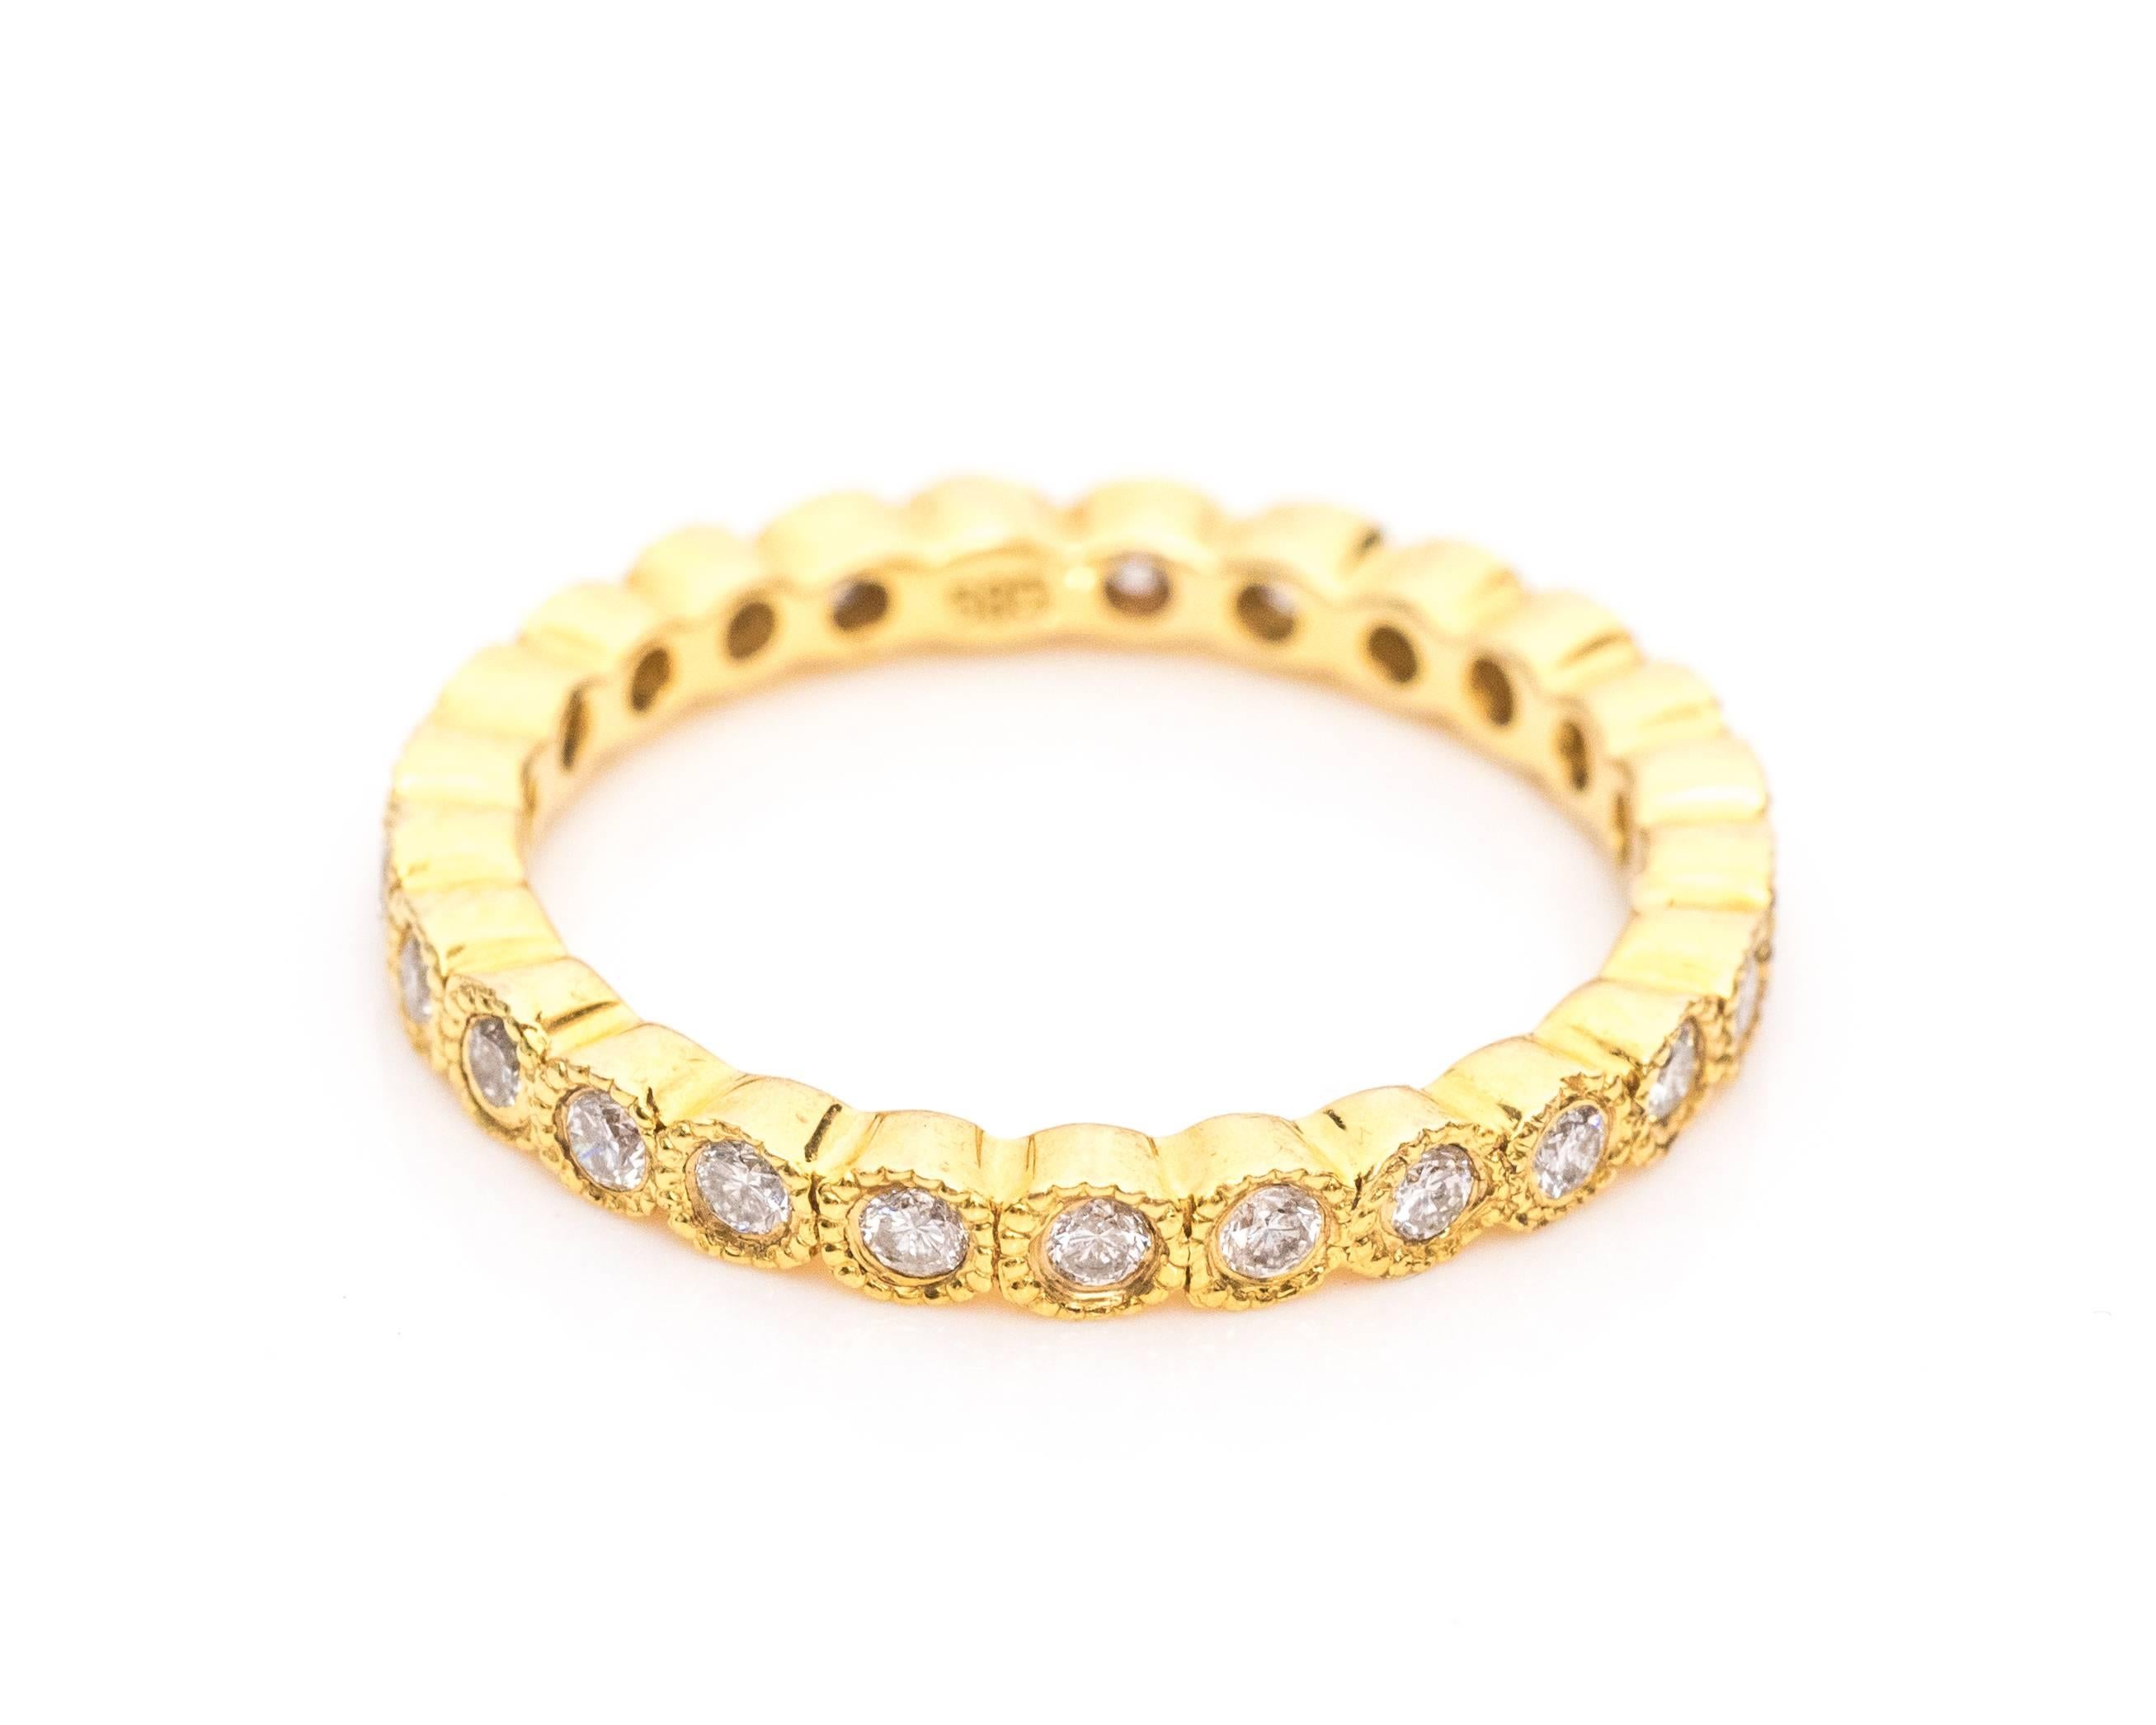 Absolutely beautiful 14 karat yellow gold eternity diamond band ring. 
Each diamond is set in a bezel frame of 14 karat yellow gold with a milgrain pattern along the border. The diamonds surround the entire ring making it an eternity band. 

This